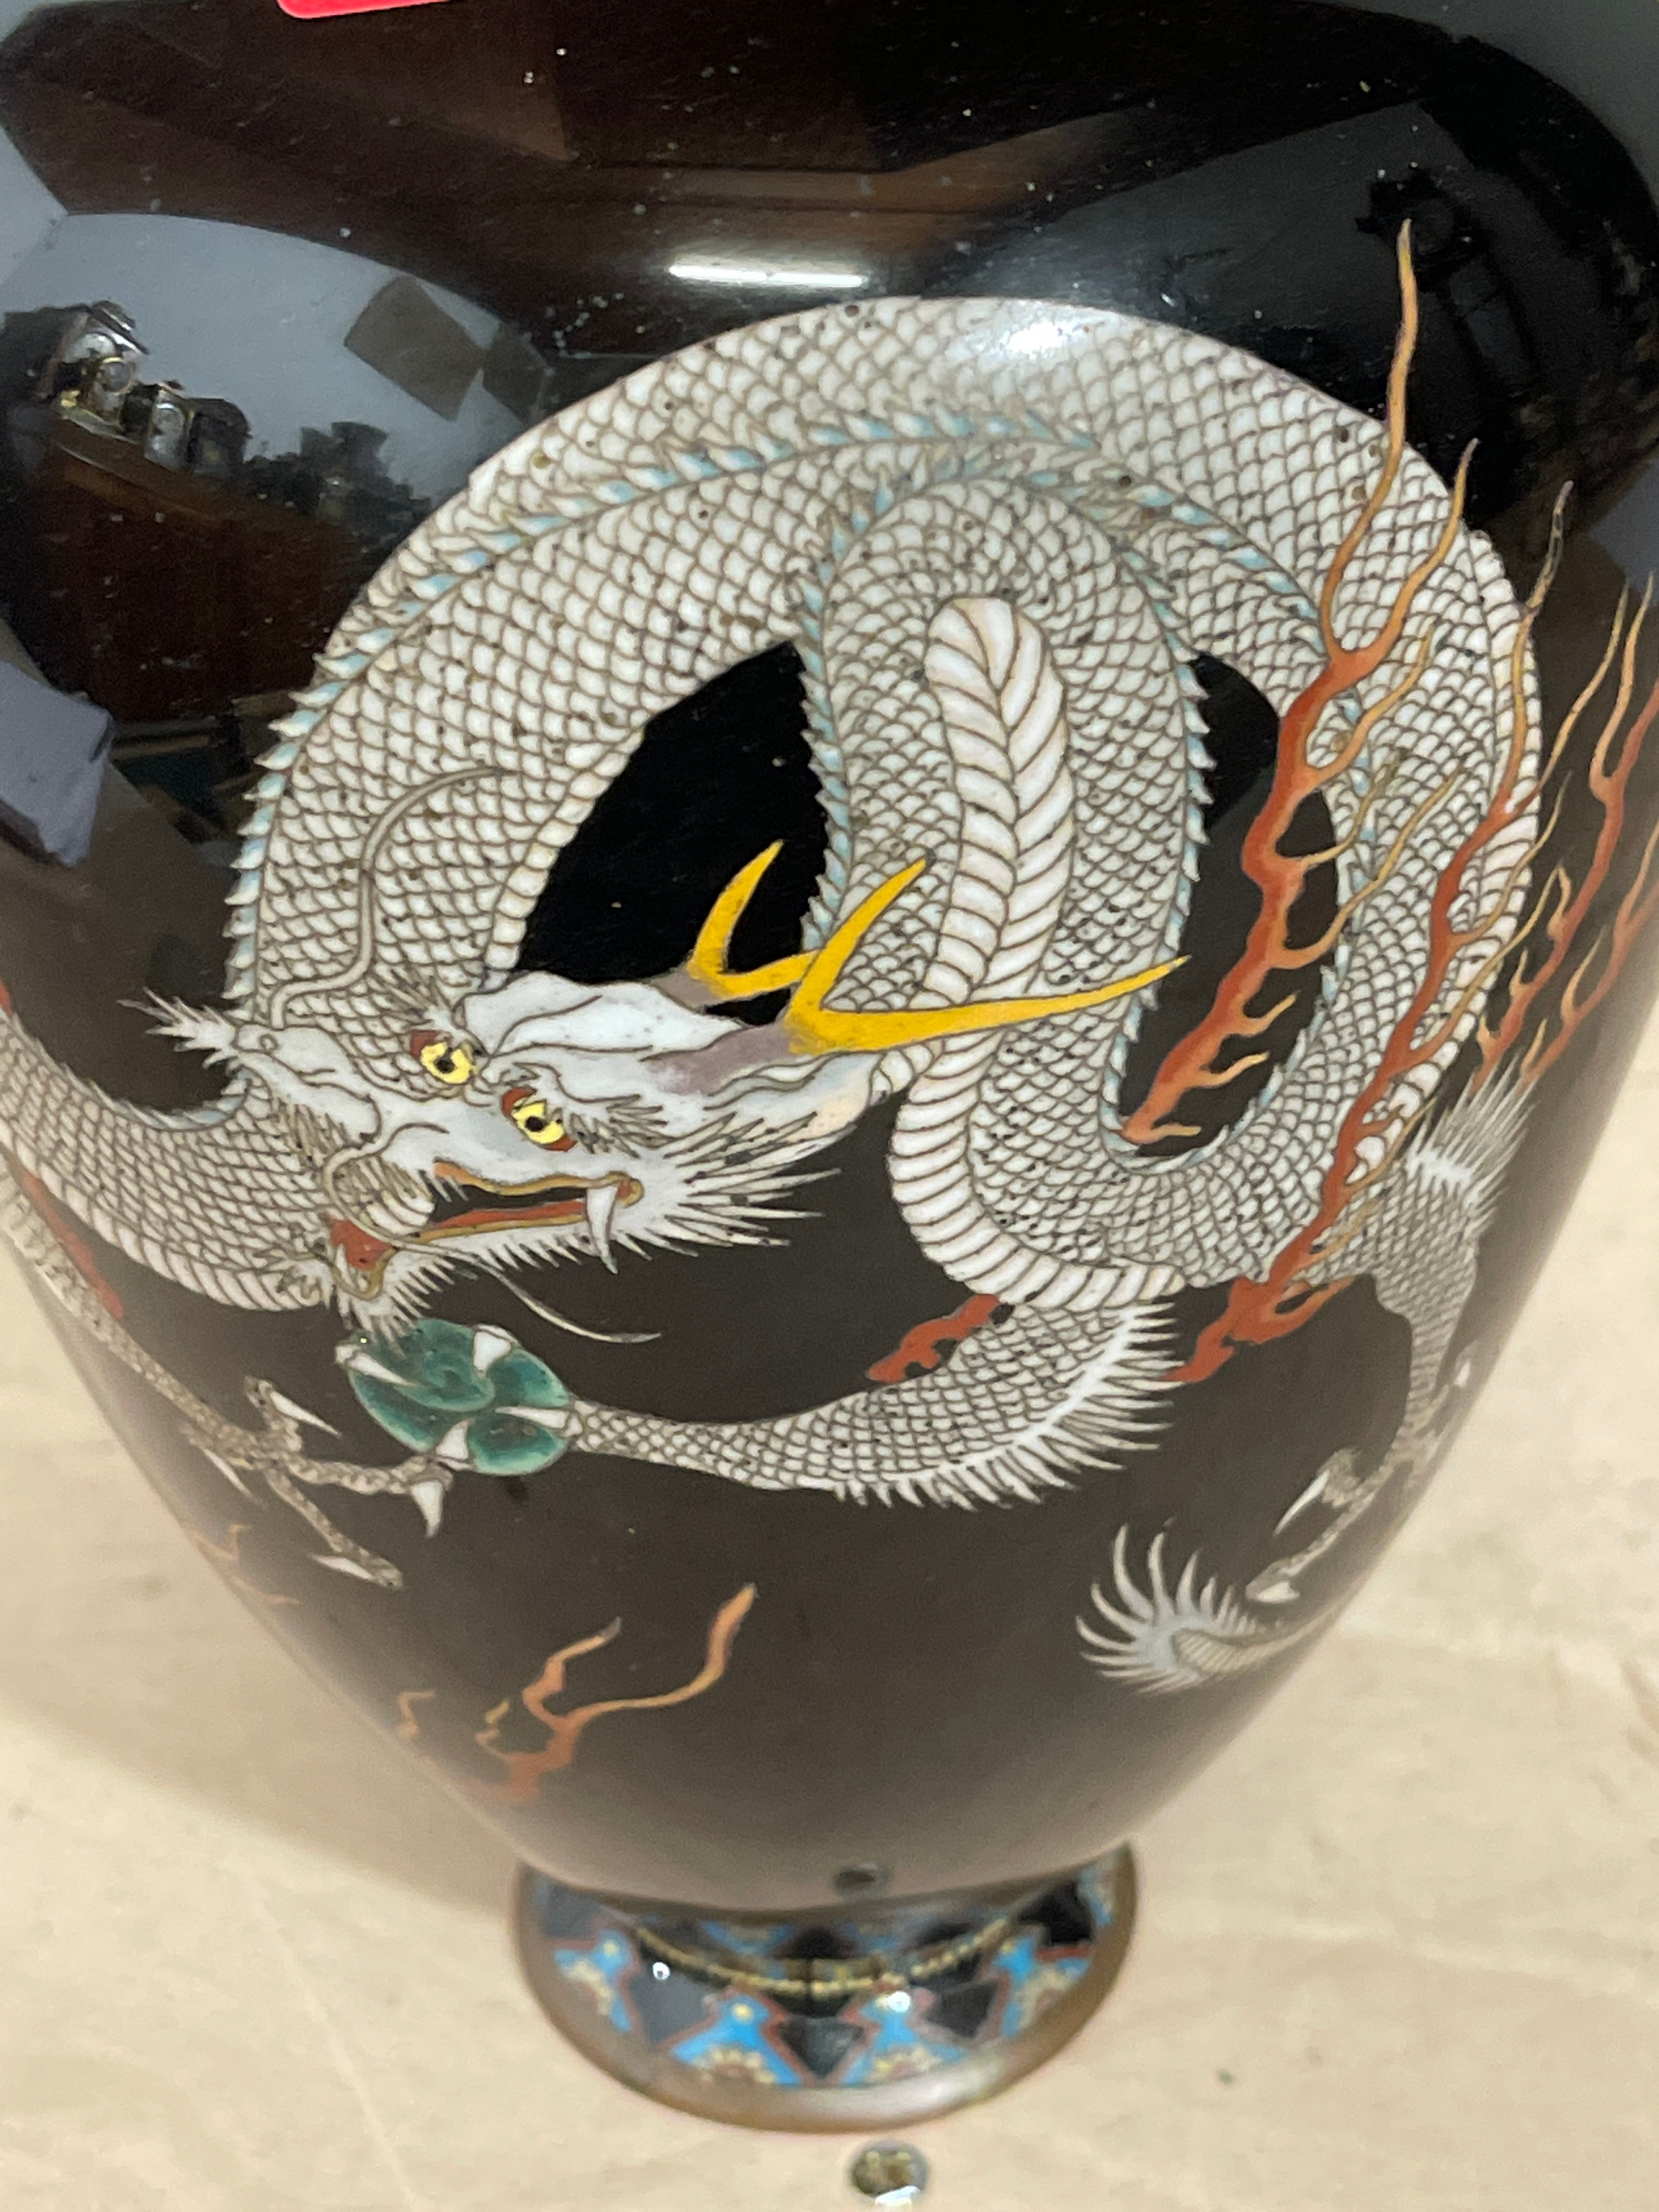 Lot of Cloisonne Dragon Vase 240mm tall and 150mm wide. - Image 2 of 10